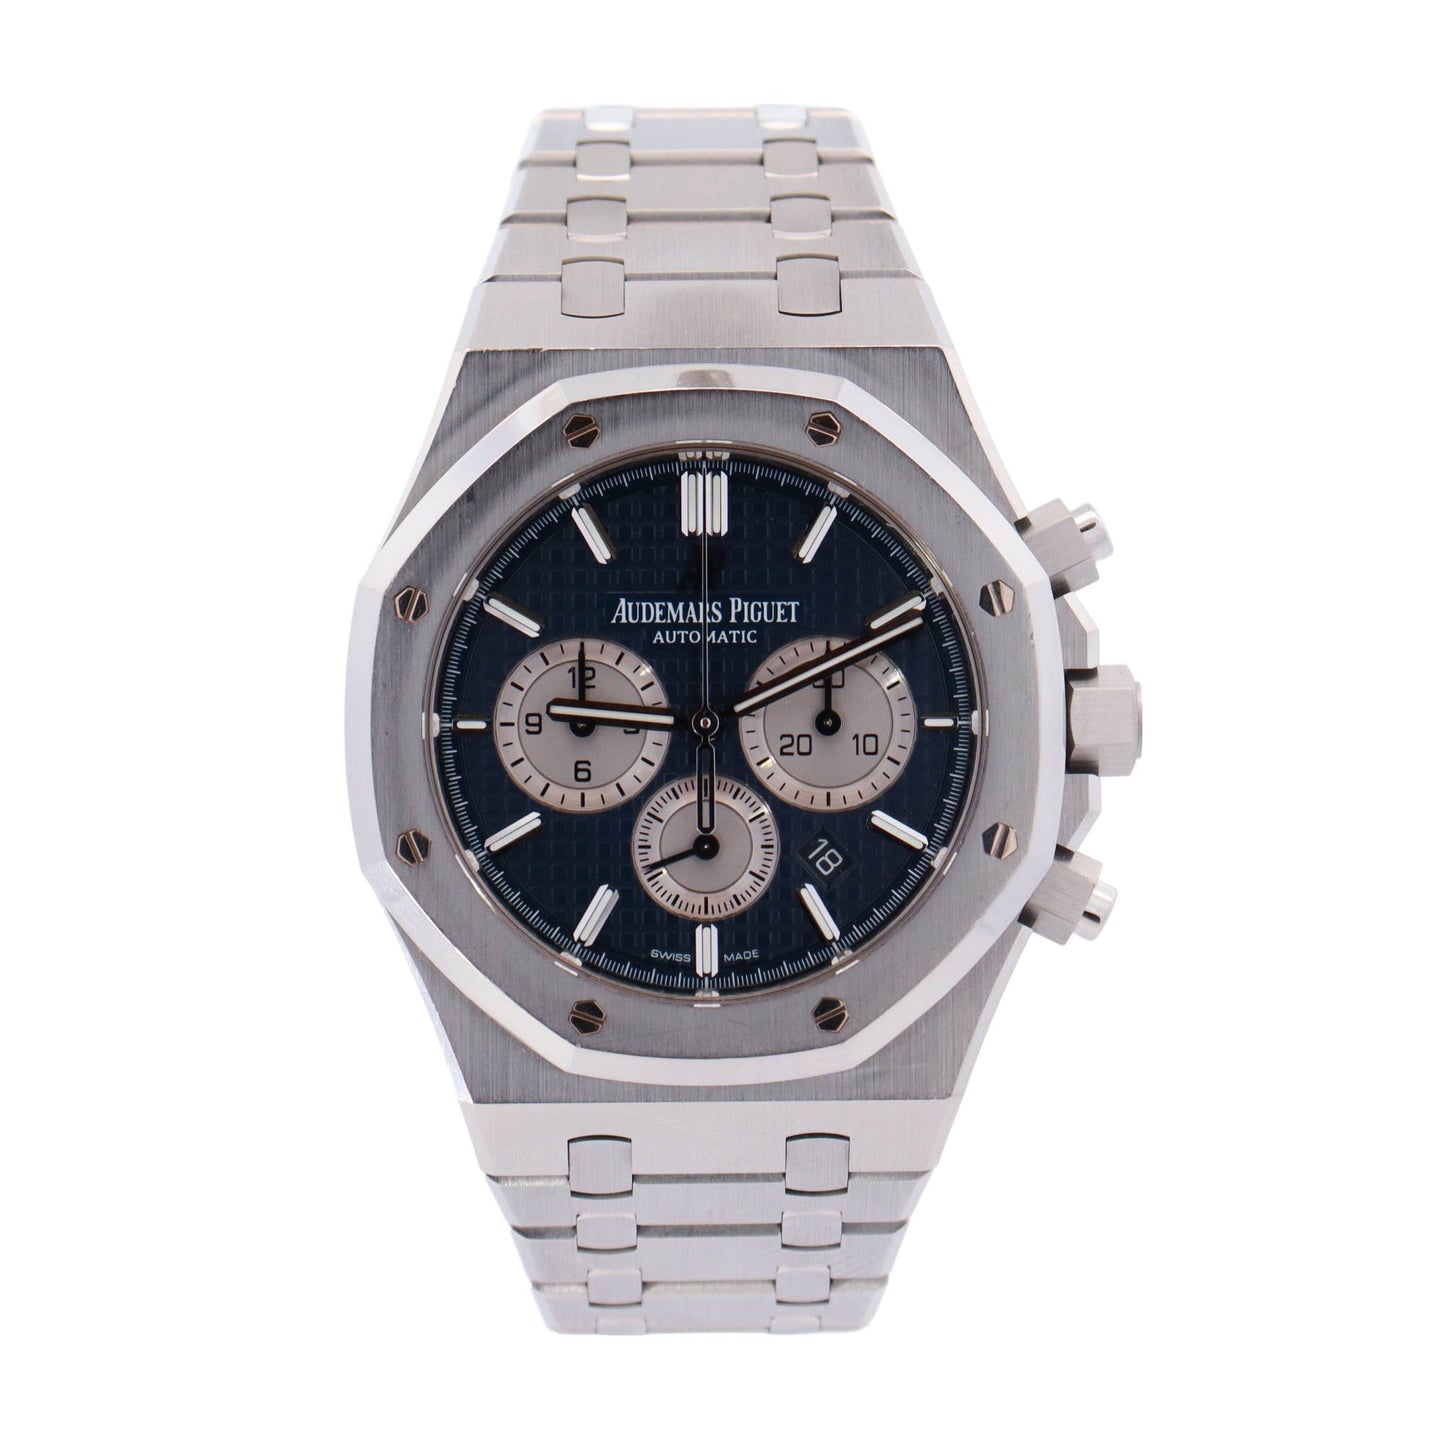 Audemars Piguet Royal Oak Stainless Steel 41mm Blue Chronograph Dial Watch Reference# 26331ST.OO.1220ST.01 - Happy Jewelers Fine Jewelry Lifetime Warranty